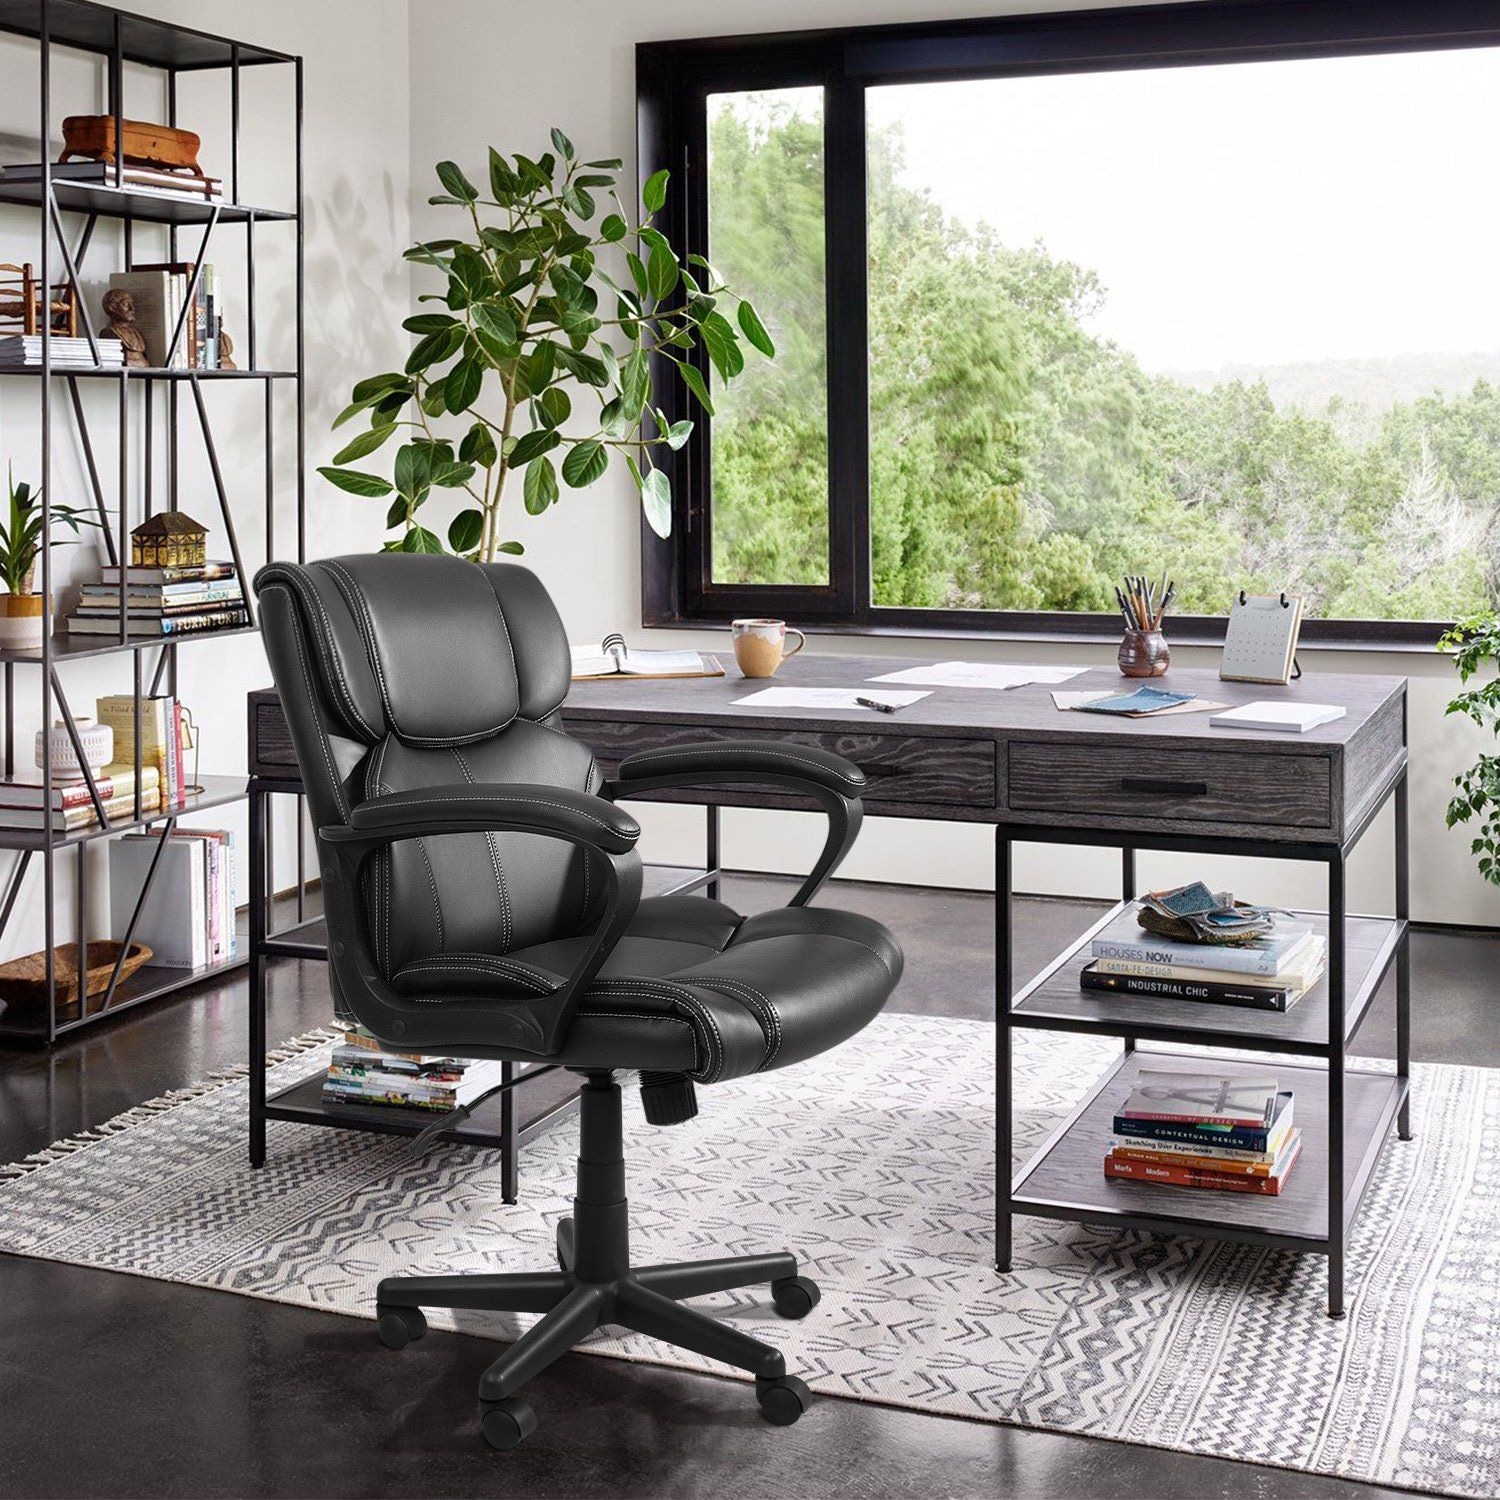 https://ak1.ostkcdn.com/images/products/is/images/direct/ba053e5cbbb2f6b0d5d16043aaf9494b97eb389e/Homall-Mid-Back-Office-Chair-Swivel-Computer-Task-Chair-with-Armrest-Ergonomic-Leather-Padded-Executive-Desk-Chair.jpg